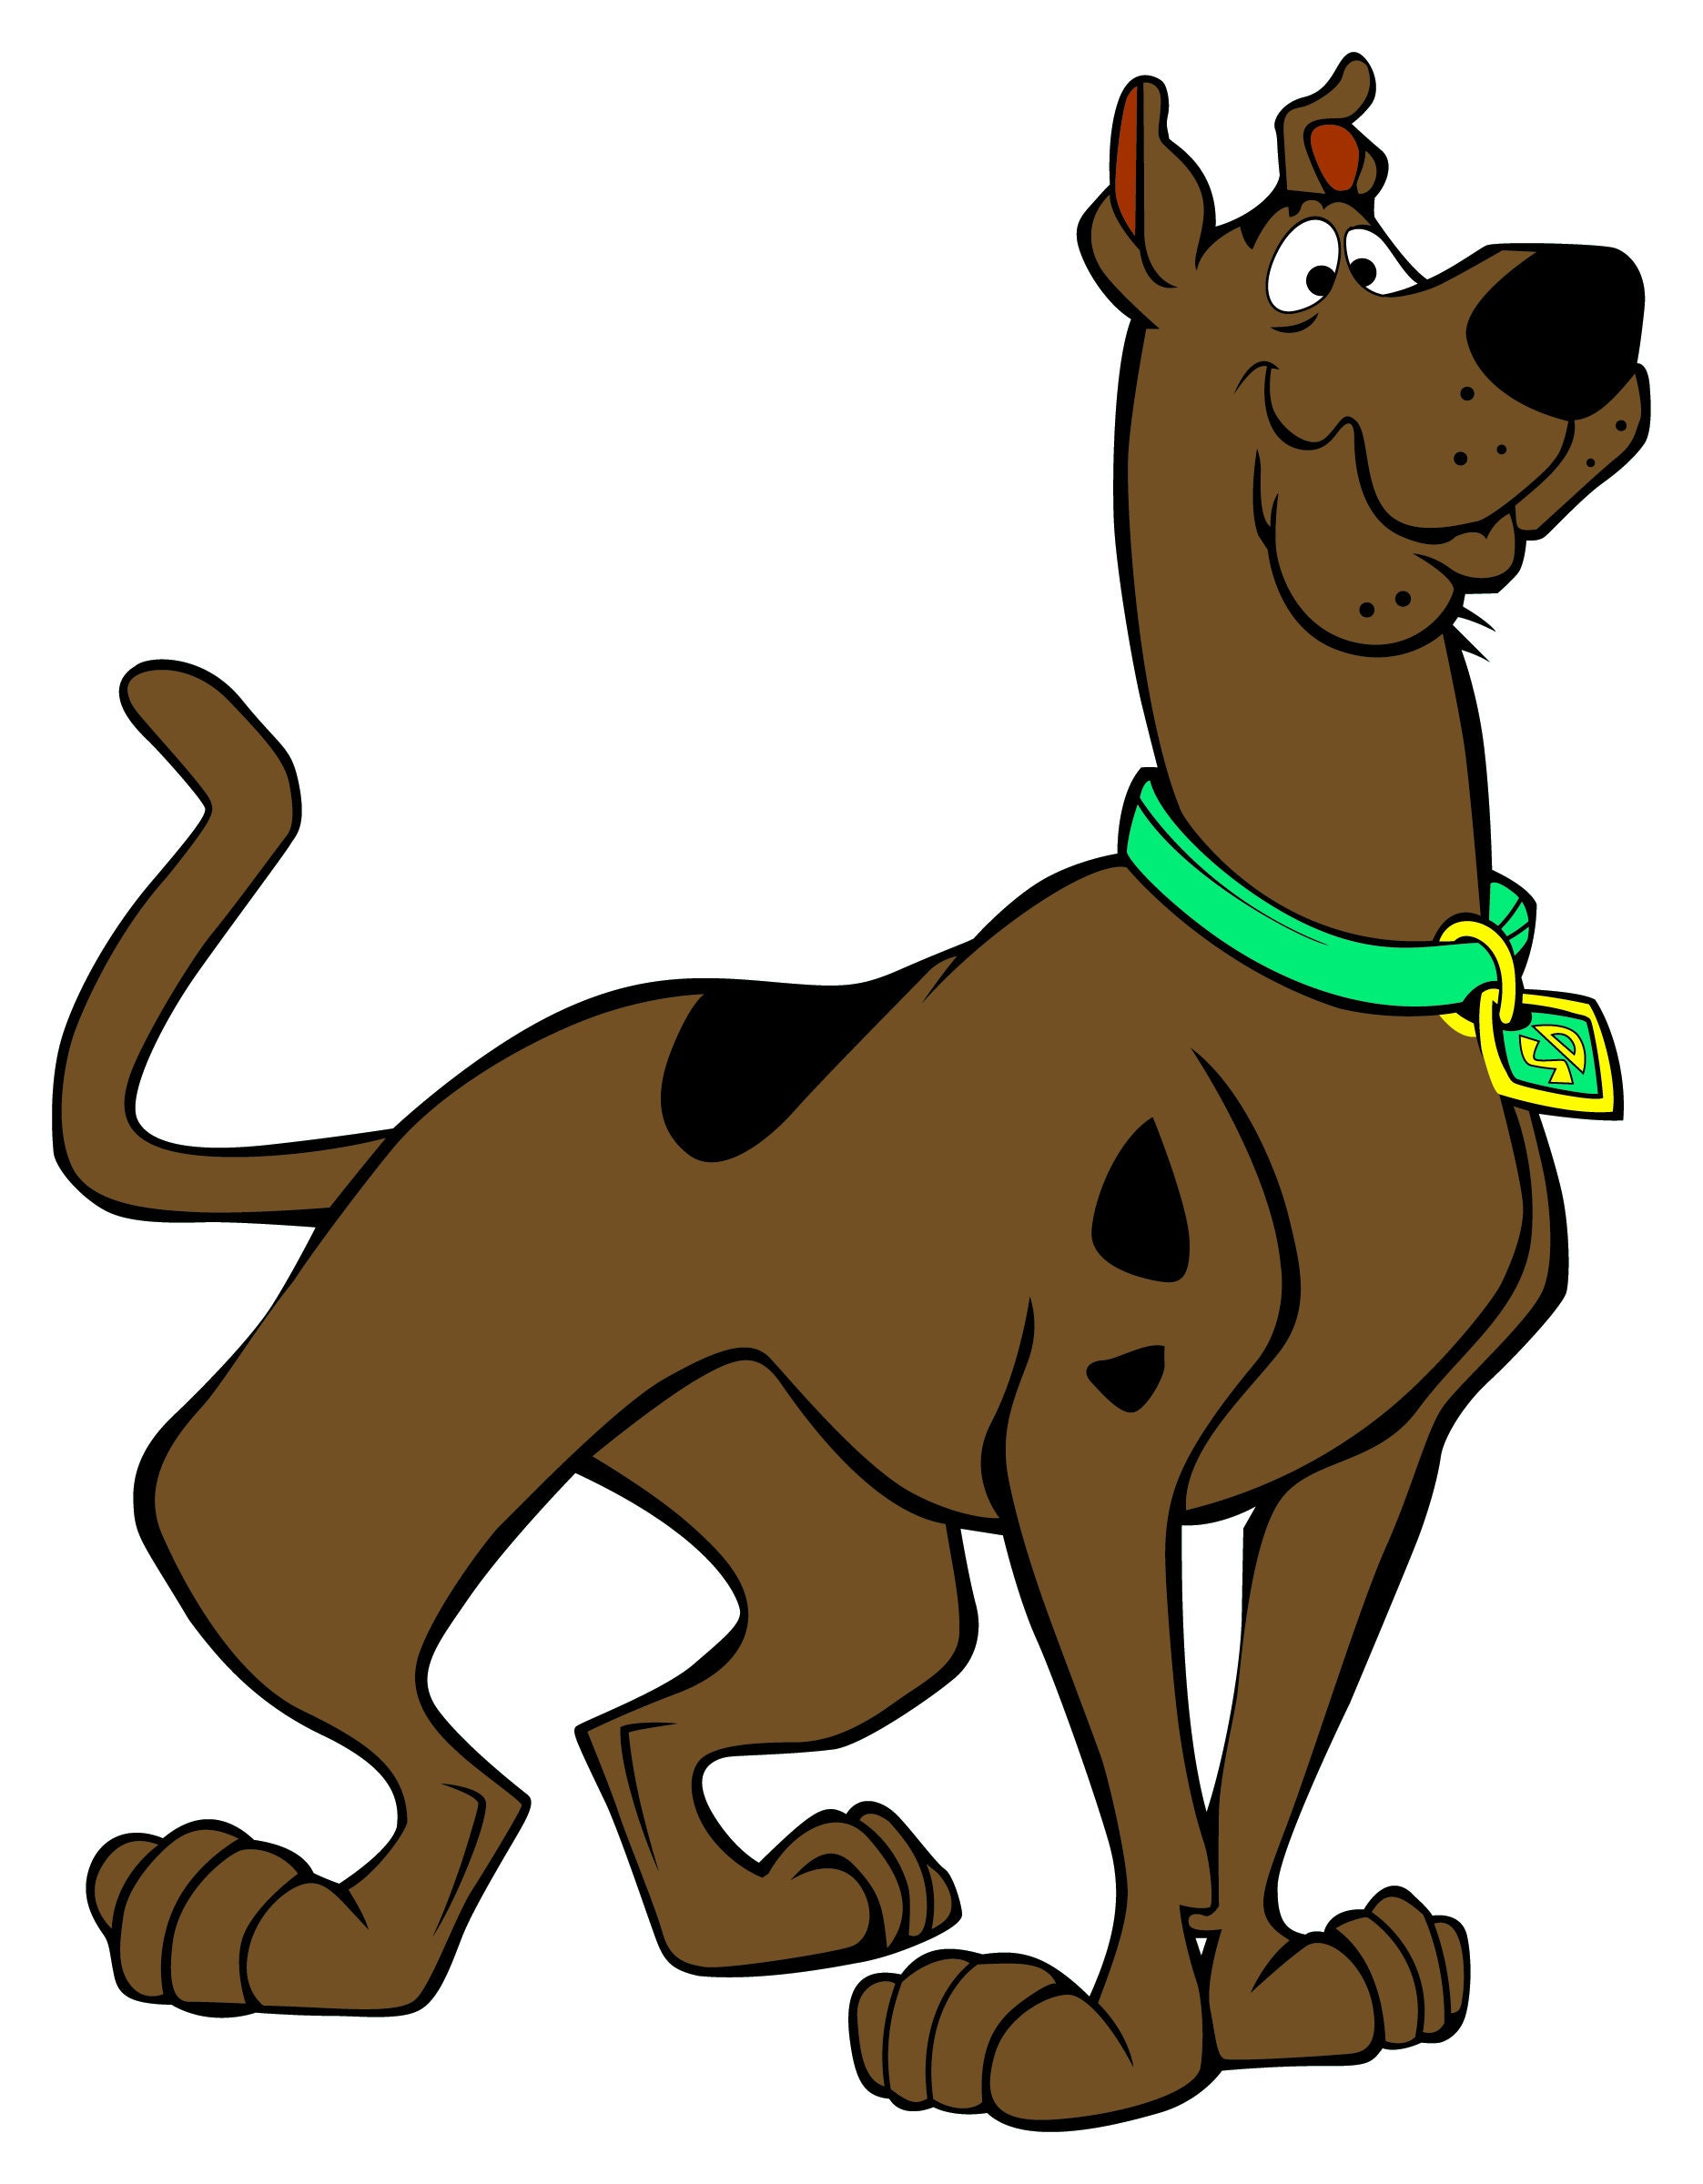 Discover Scooby Doo Vinyl Decal / Sticker 10 sizes!! fr€€ Shipping